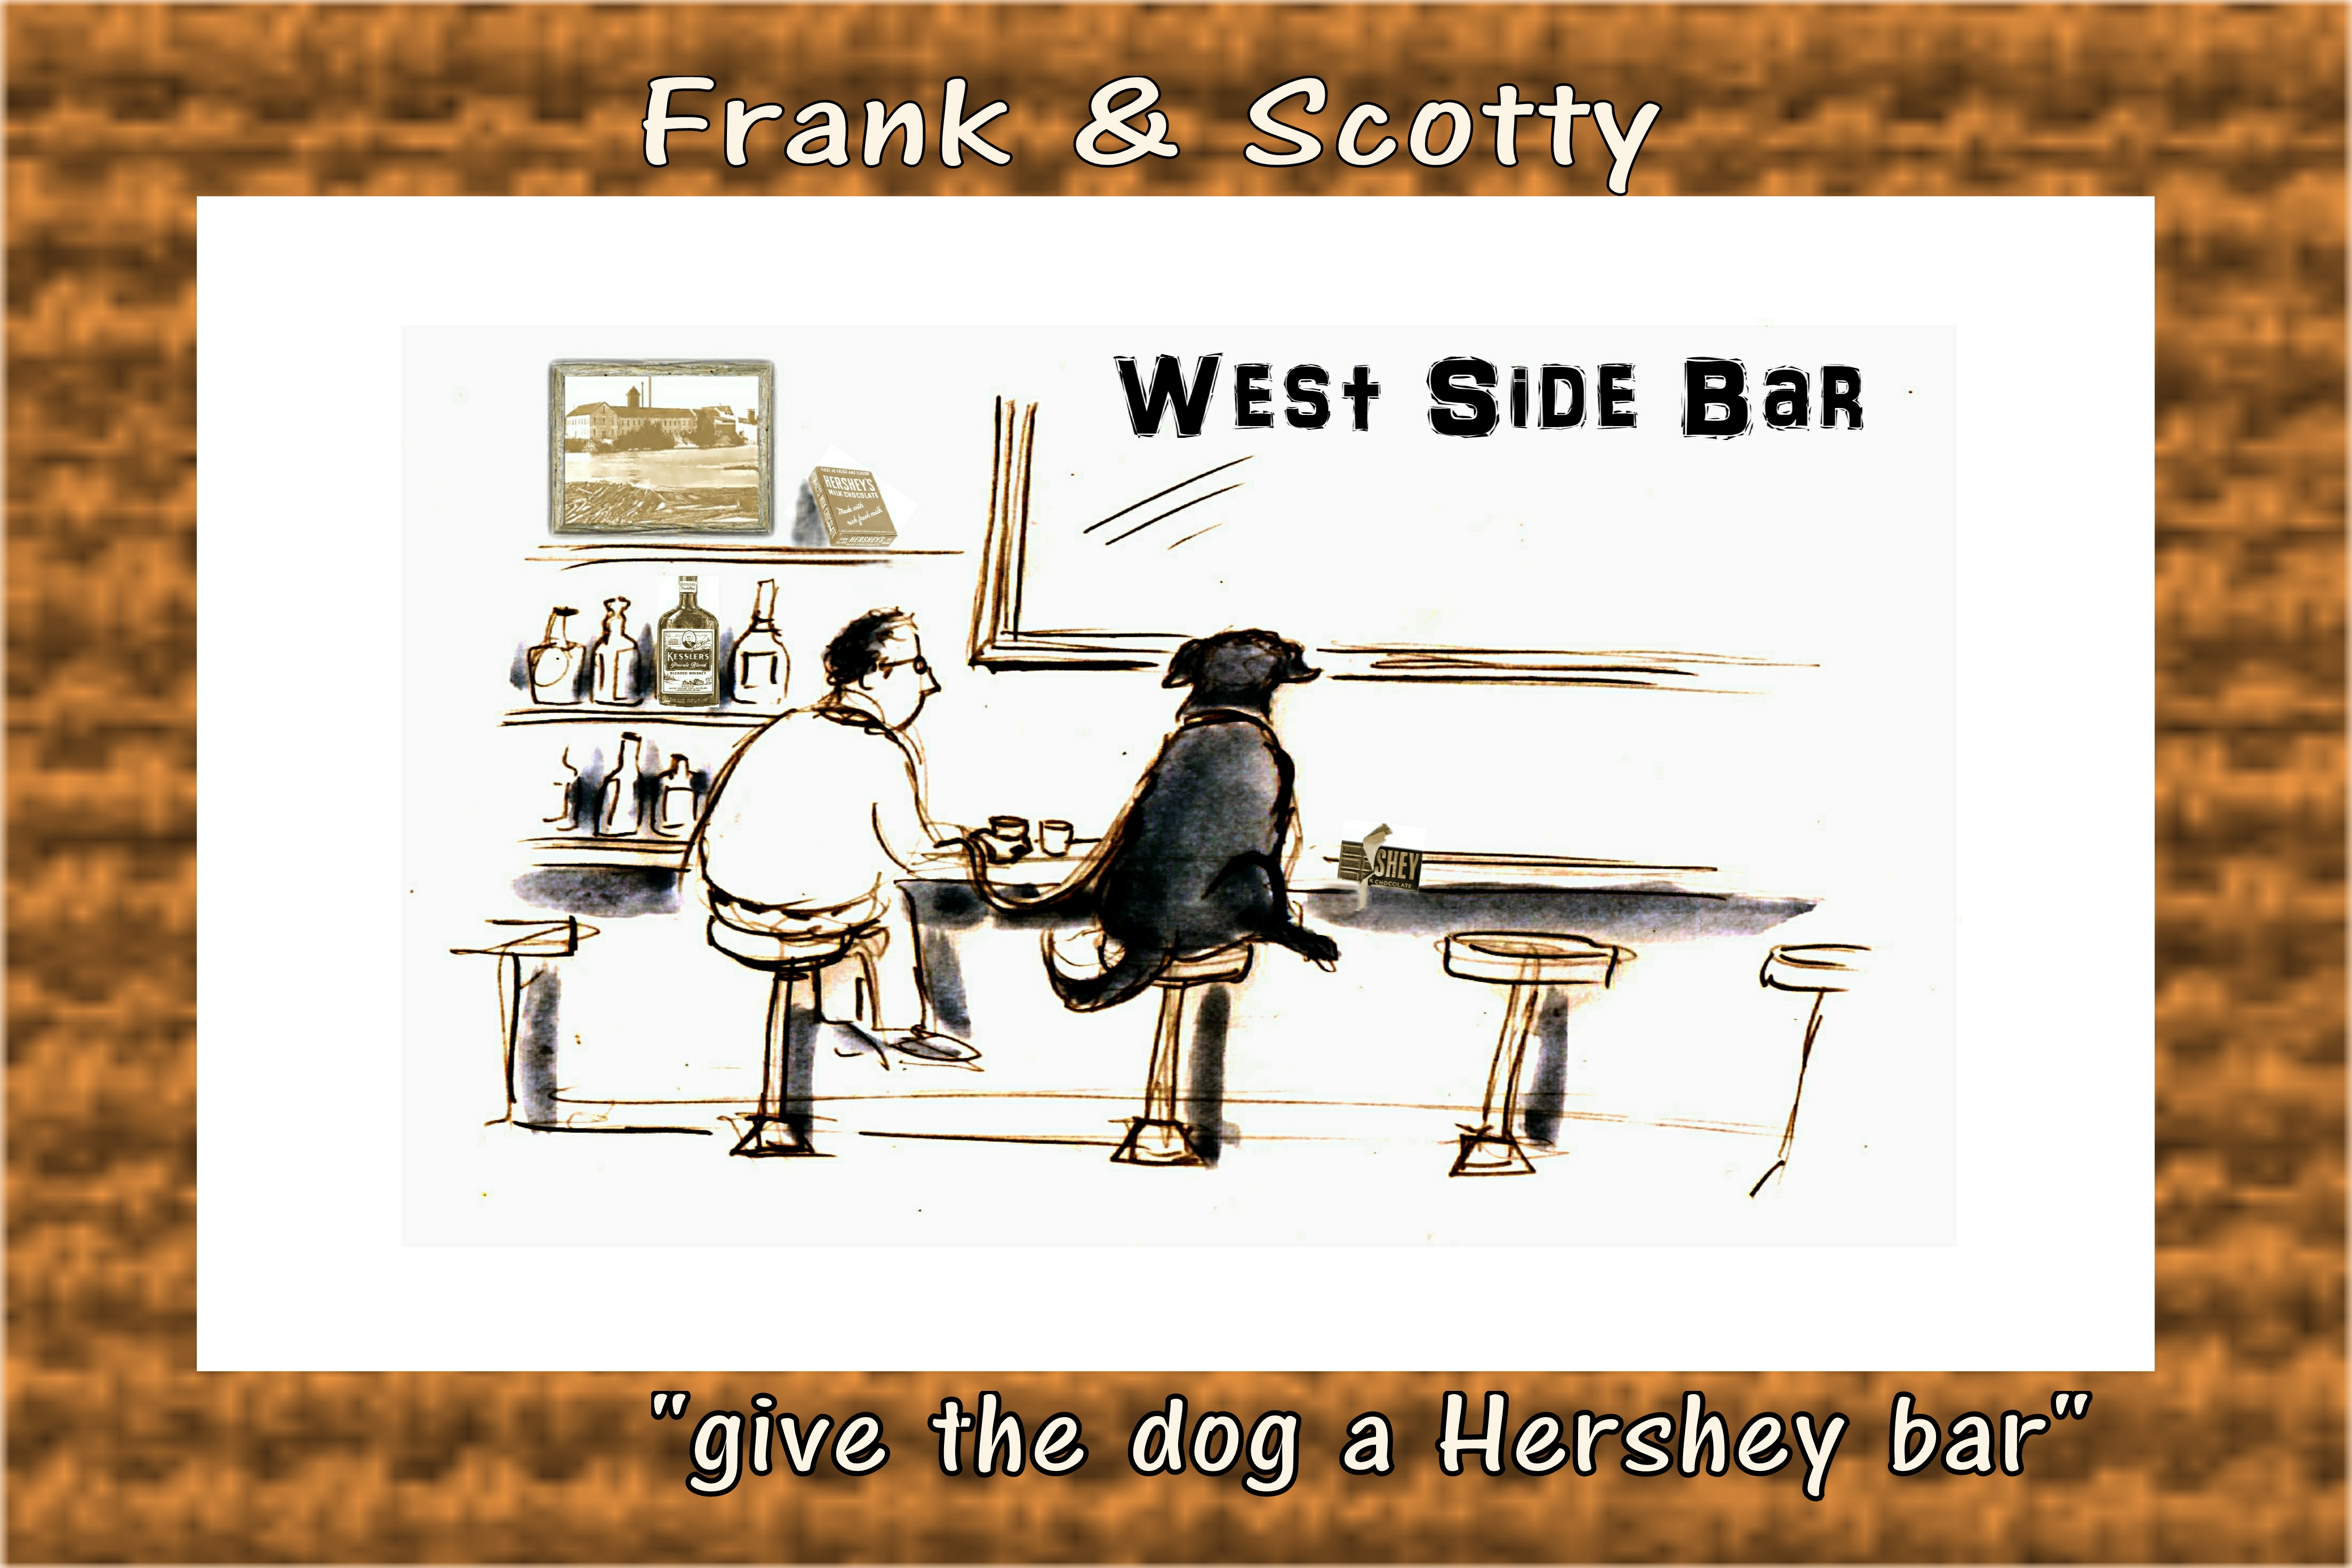 Frank and Scotty made with sublimation printing